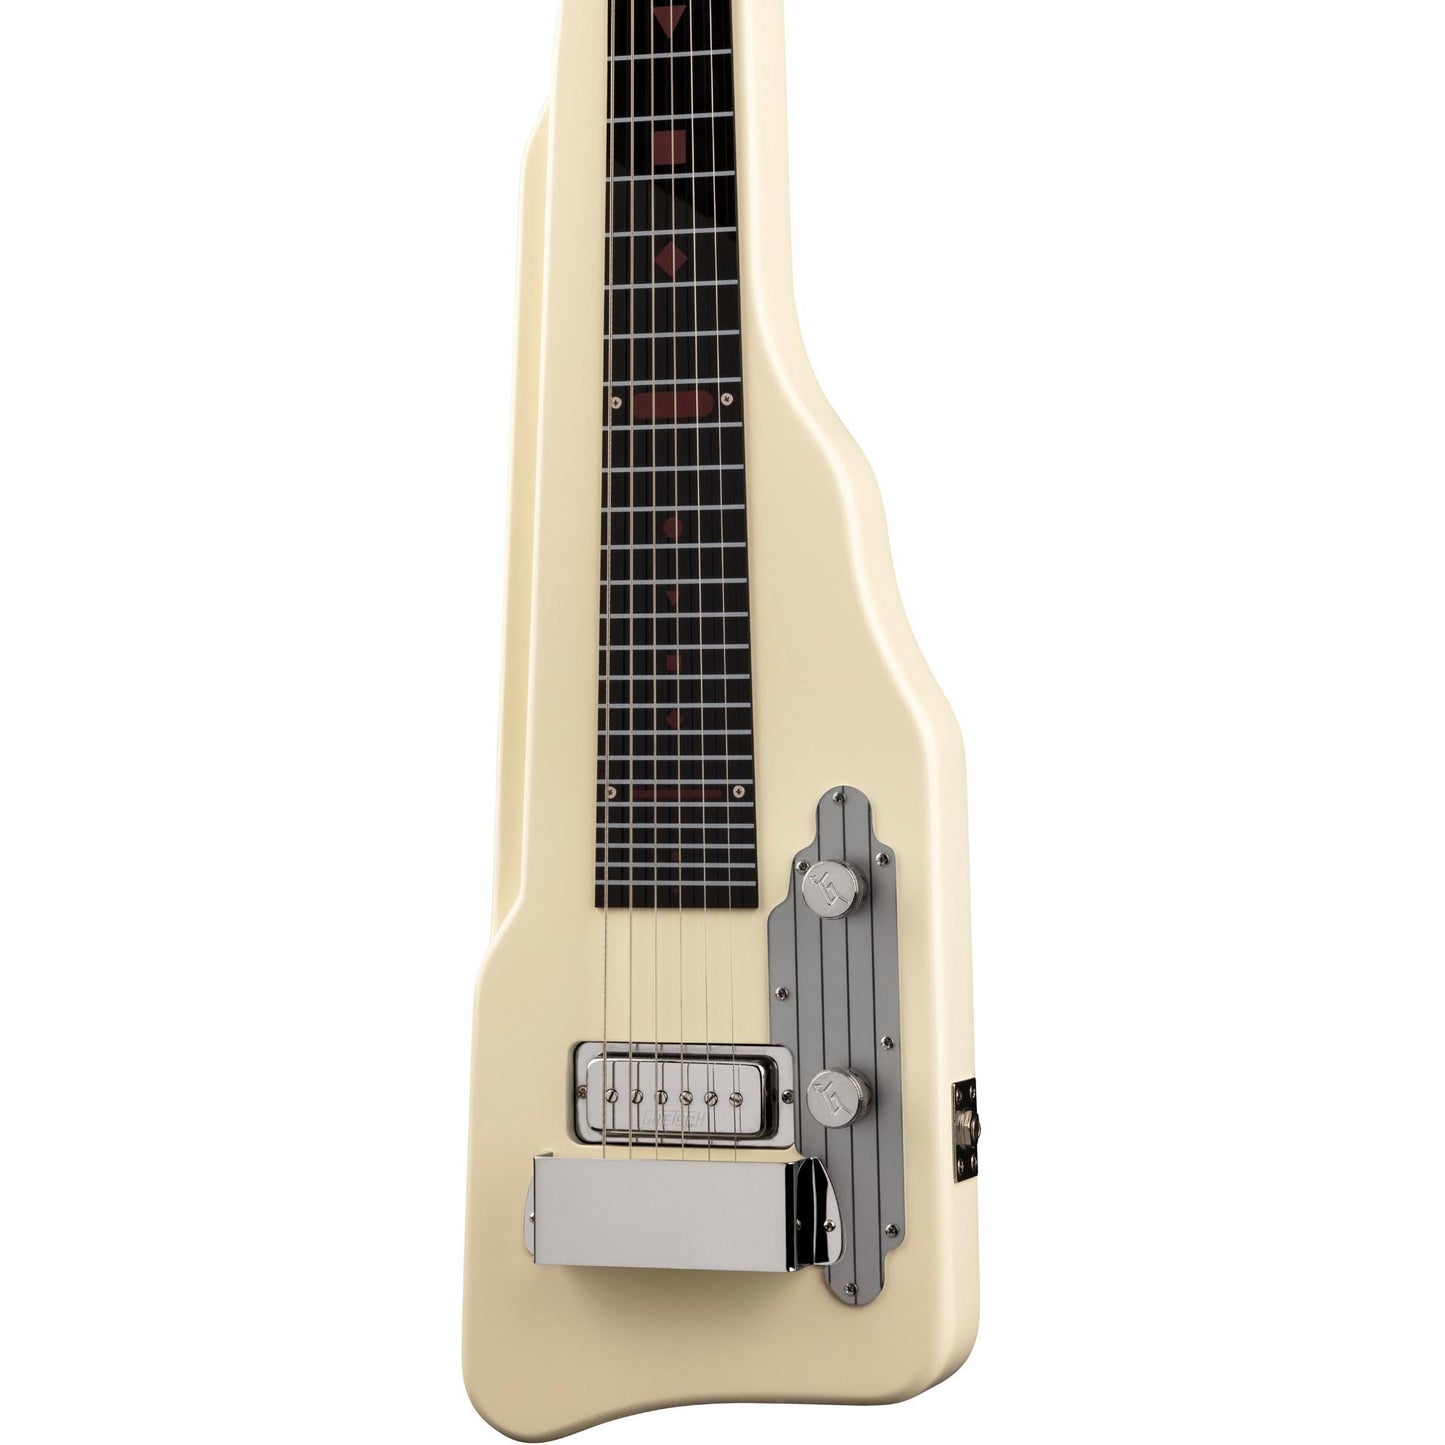 Gretsch G5700 Electromatic Lap Steel Electric Guitar in Vintage White